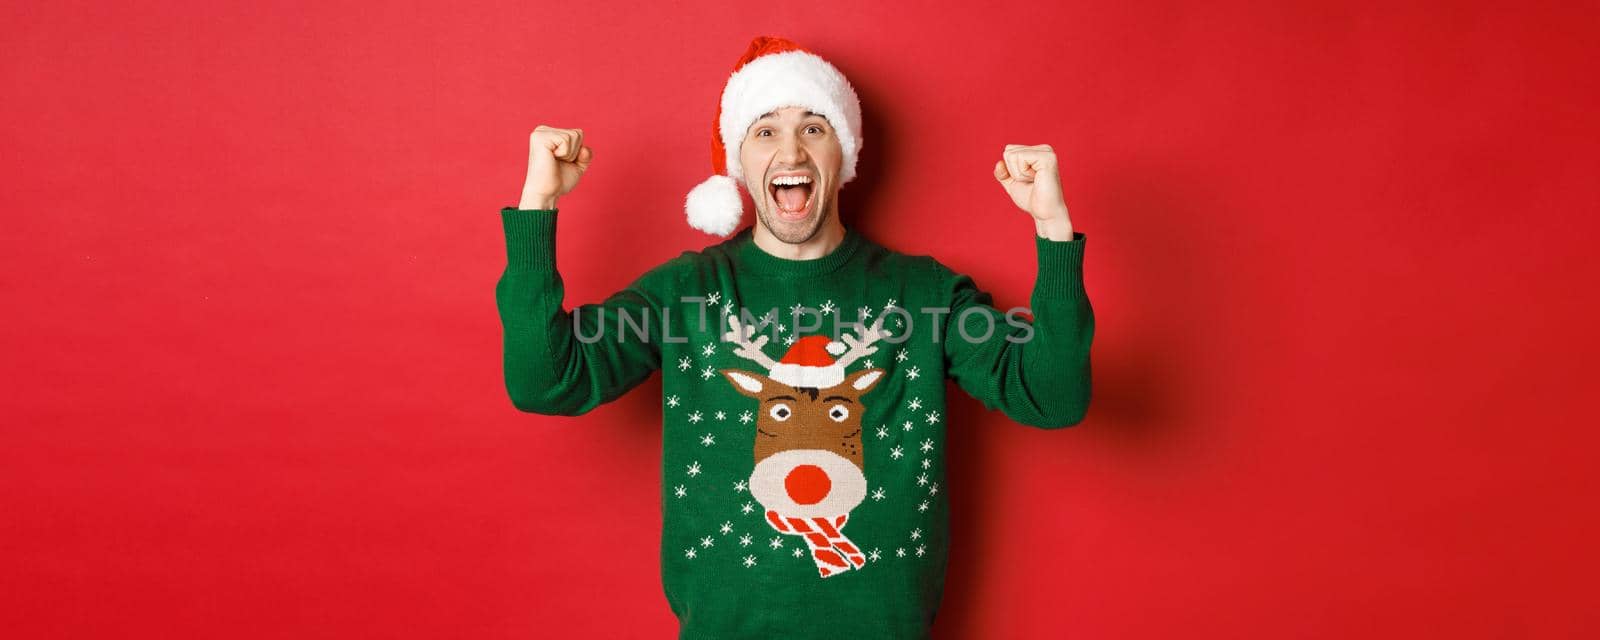 Portrait of cheerful attractive man celebrating new year, wearing green sweater and santa hat, shouting for joy, winning or triumphing, standing over red background.